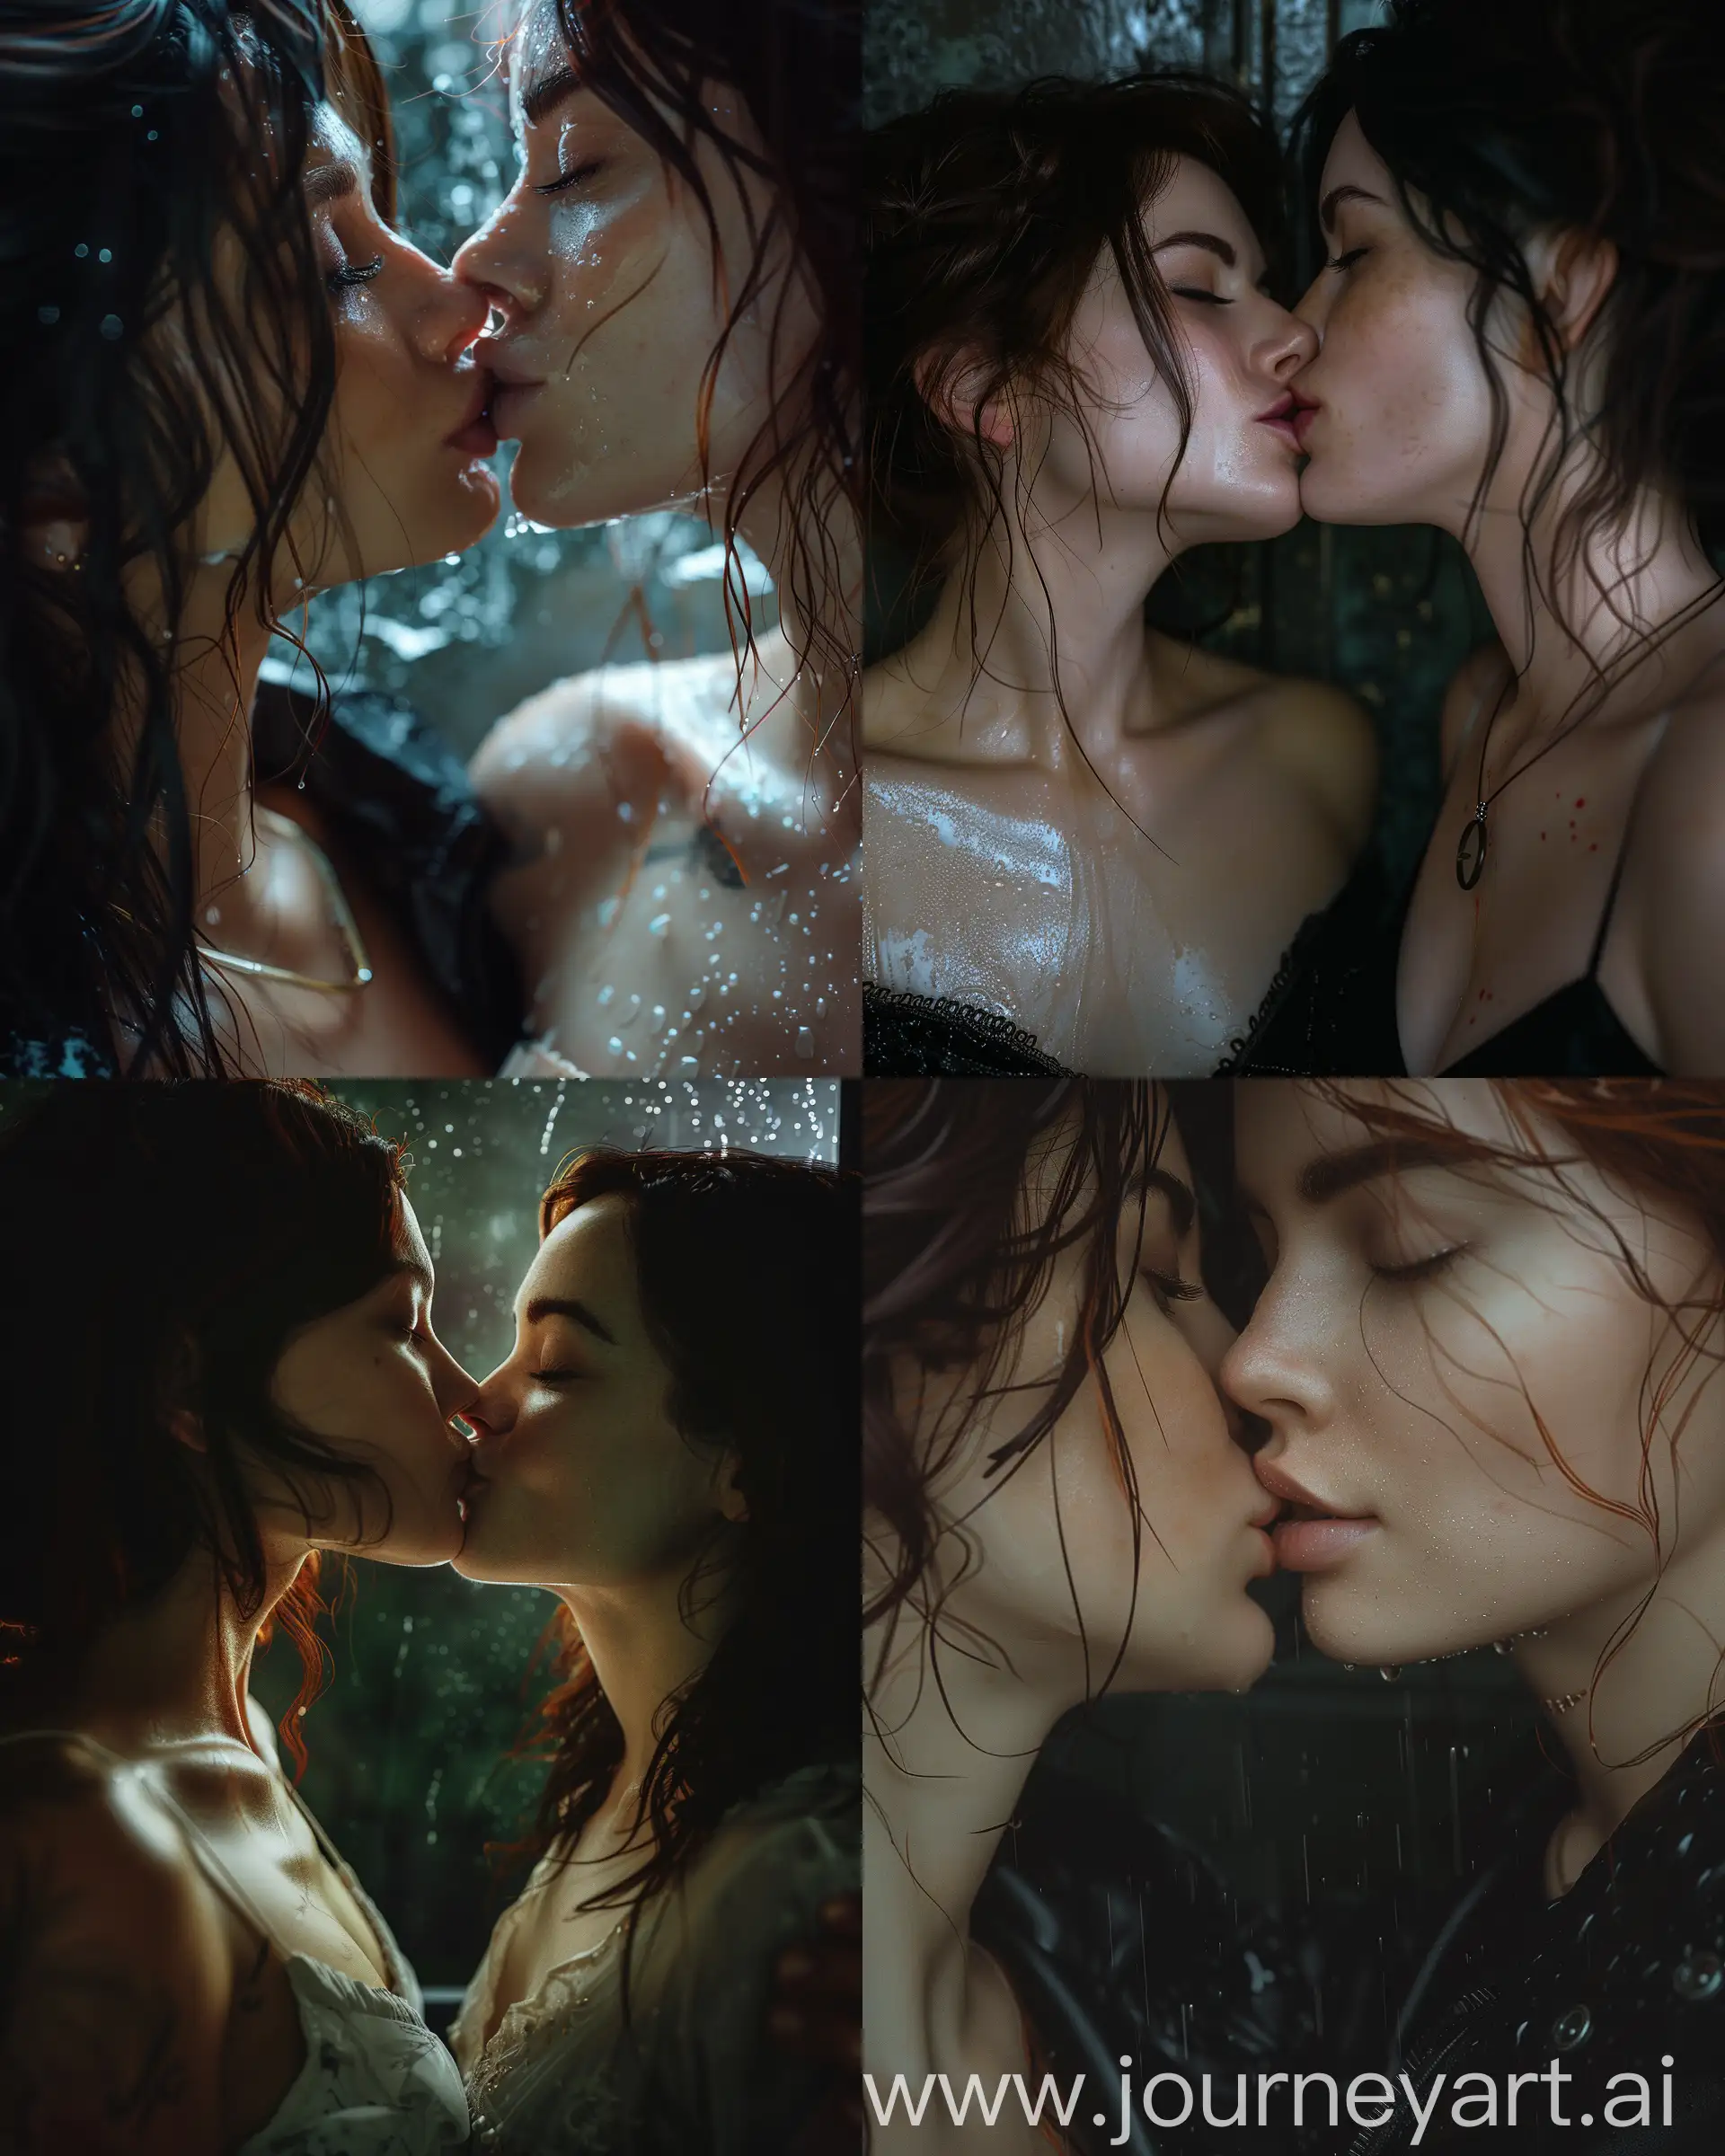 Romantic-Kiss-Between-Girlfriend-and-Mother-in-Cinematic-Setting